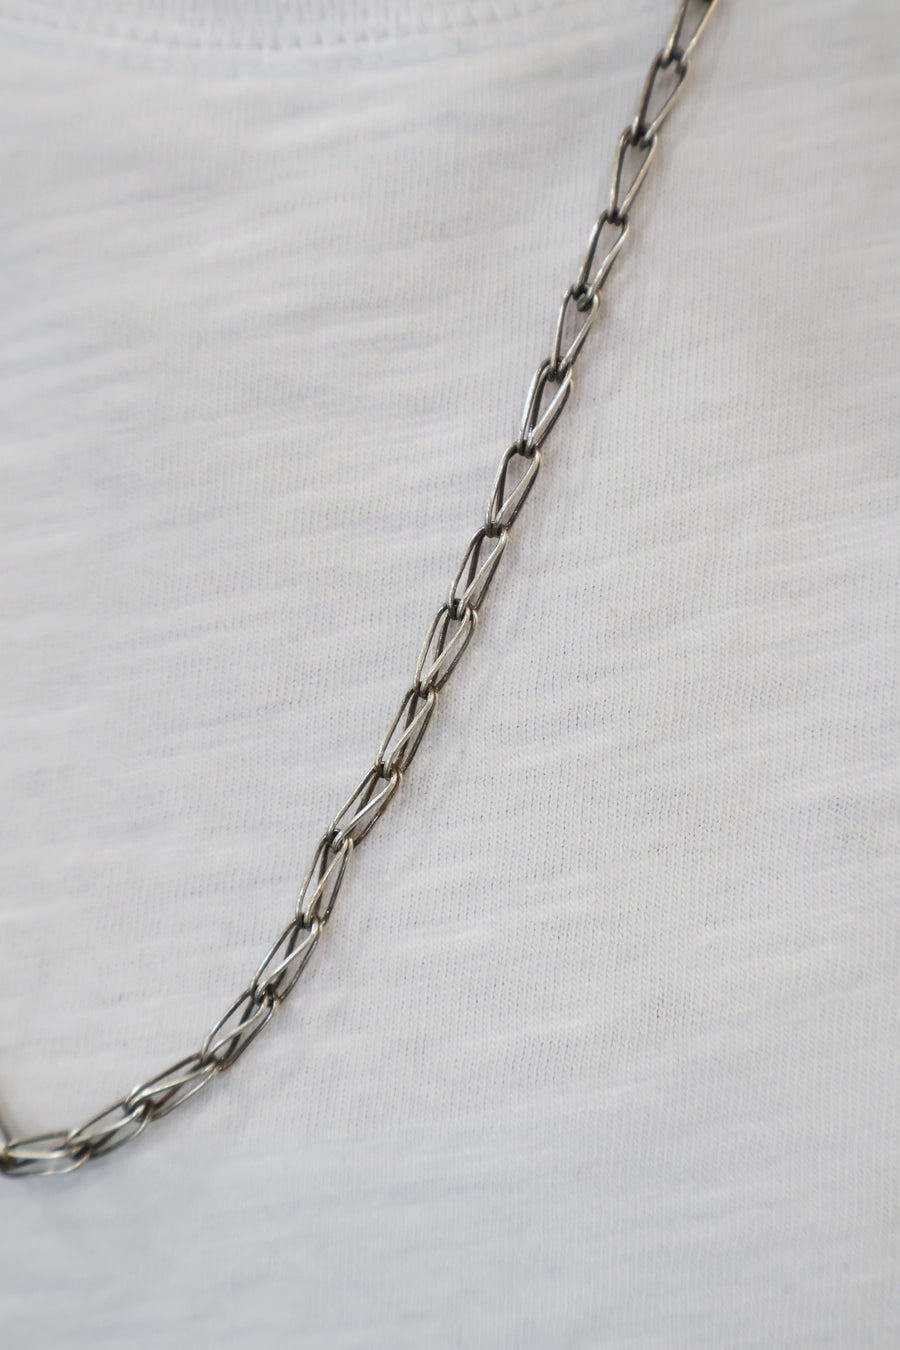 Double Link Chain - 24"